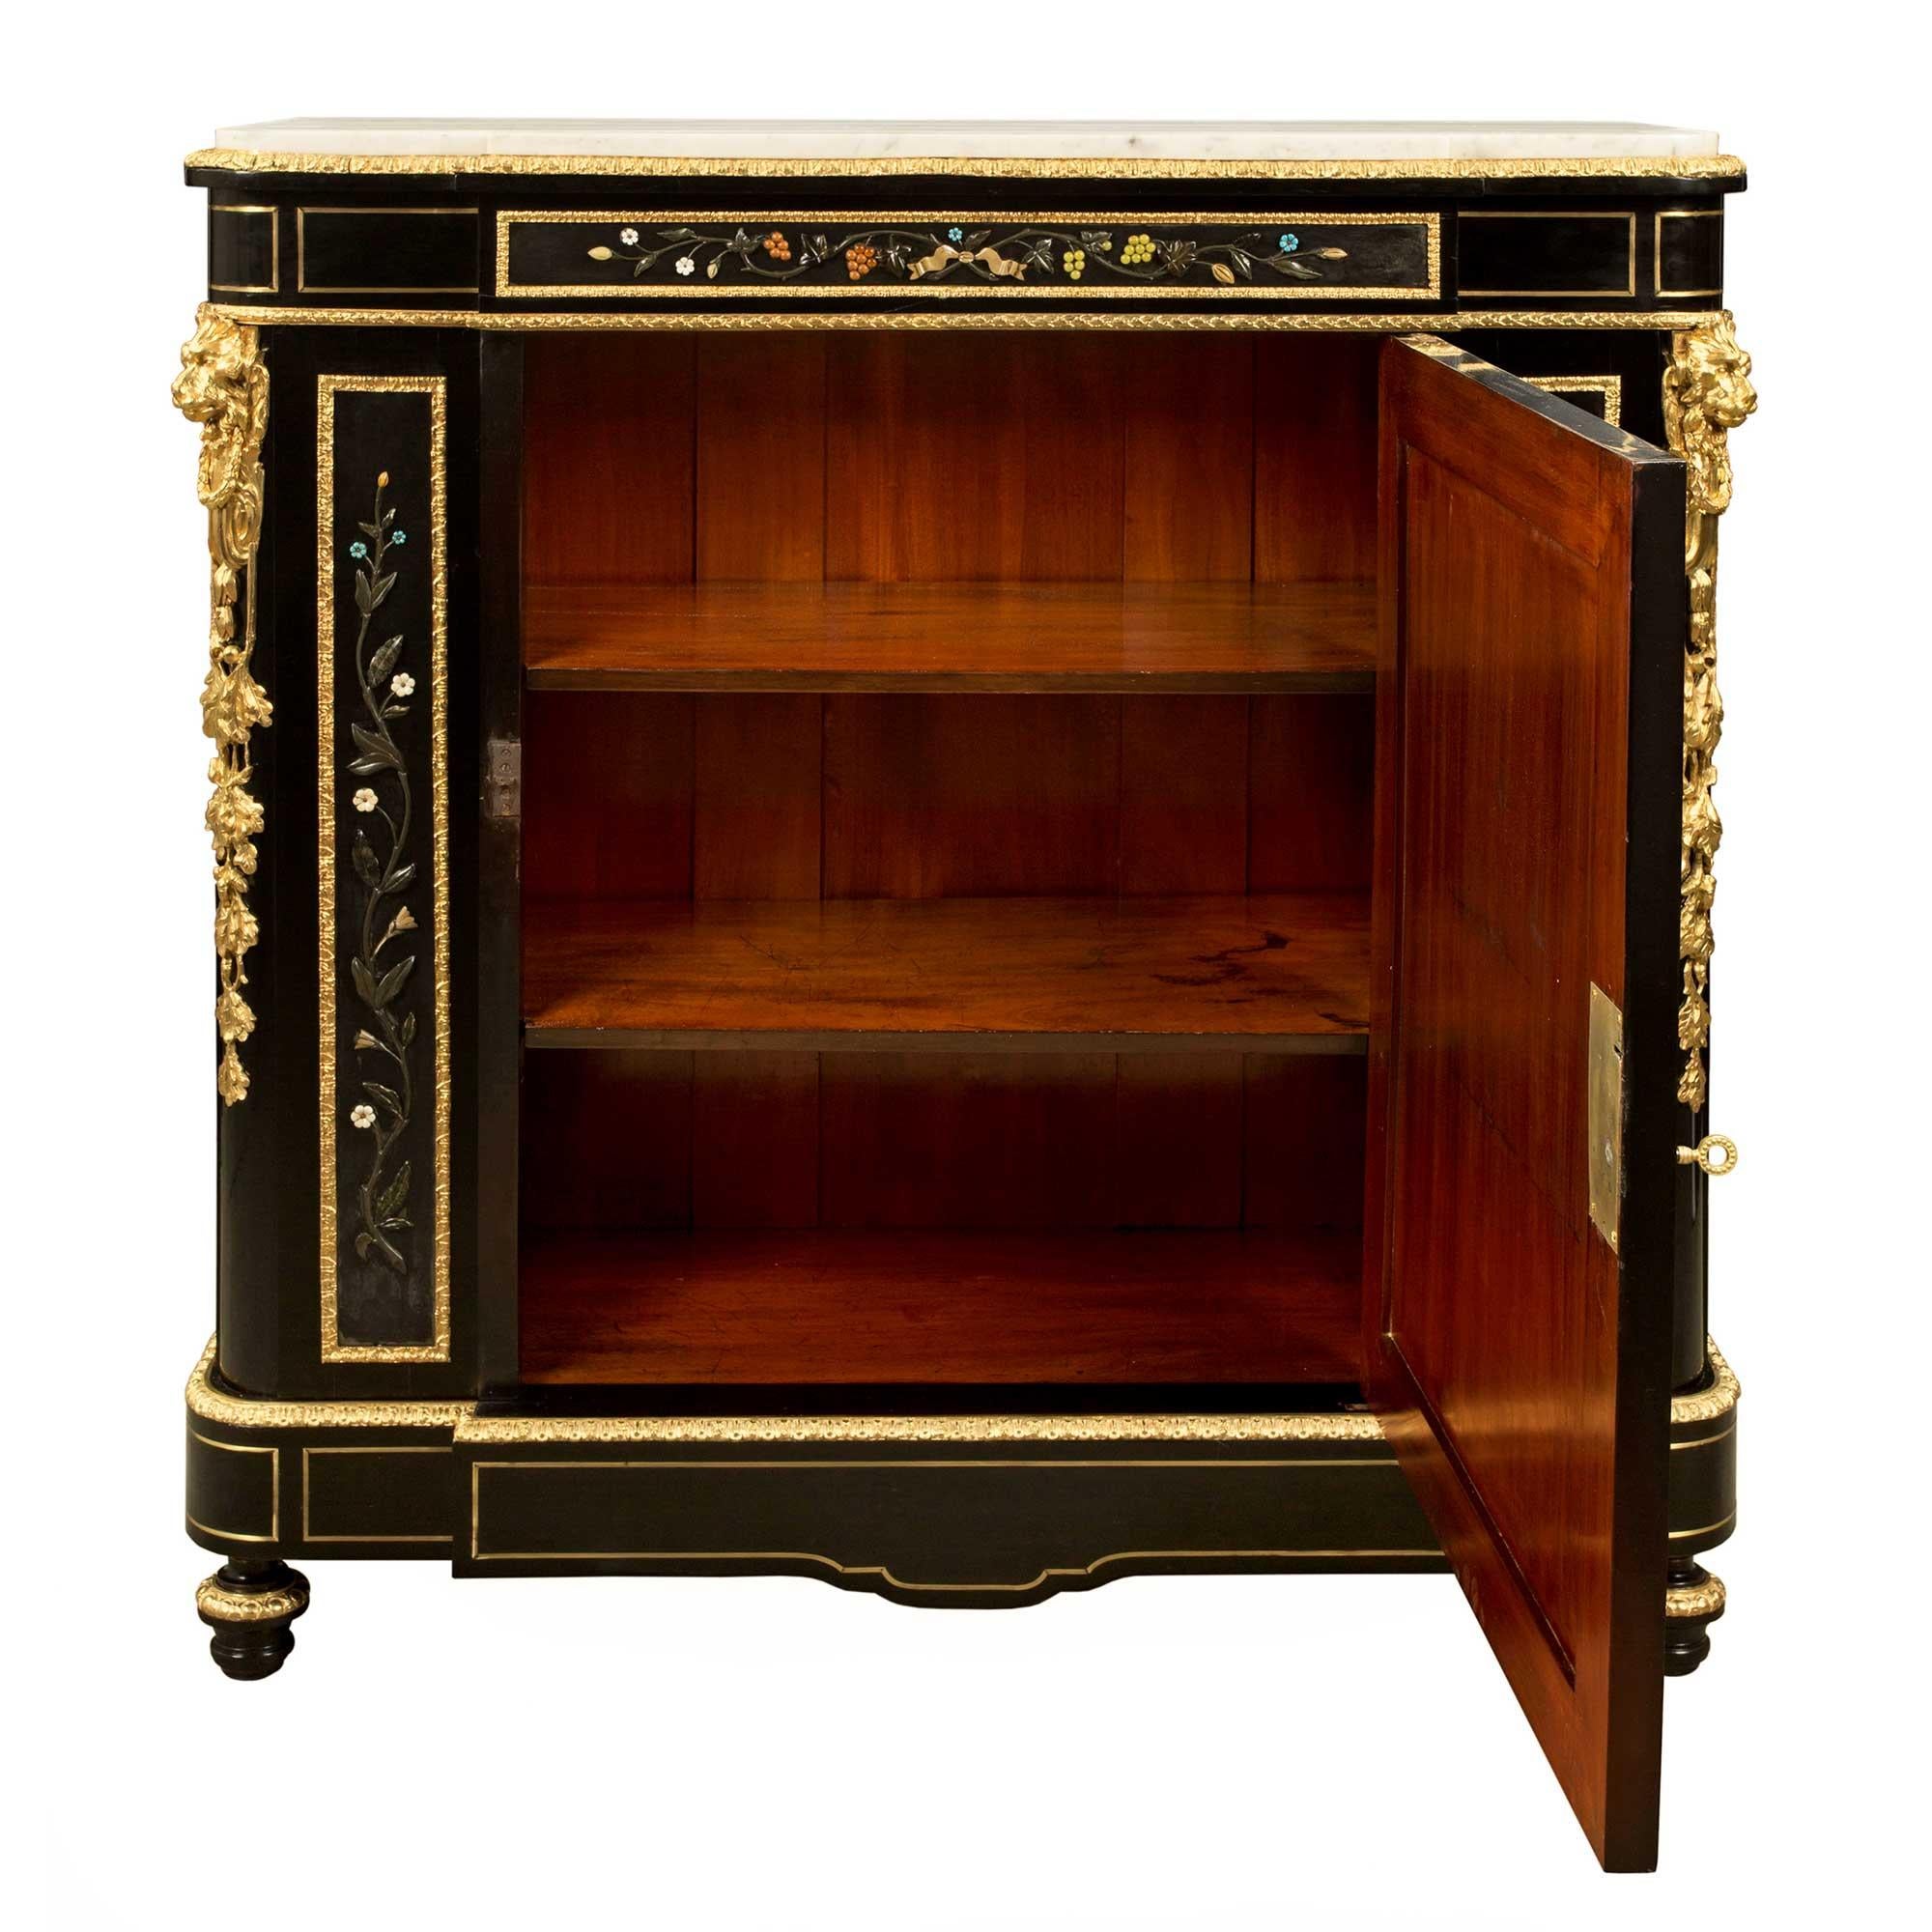 French 19th Century Napoleon III Period Ormolu and Marble Cabinet In Good Condition For Sale In West Palm Beach, FL